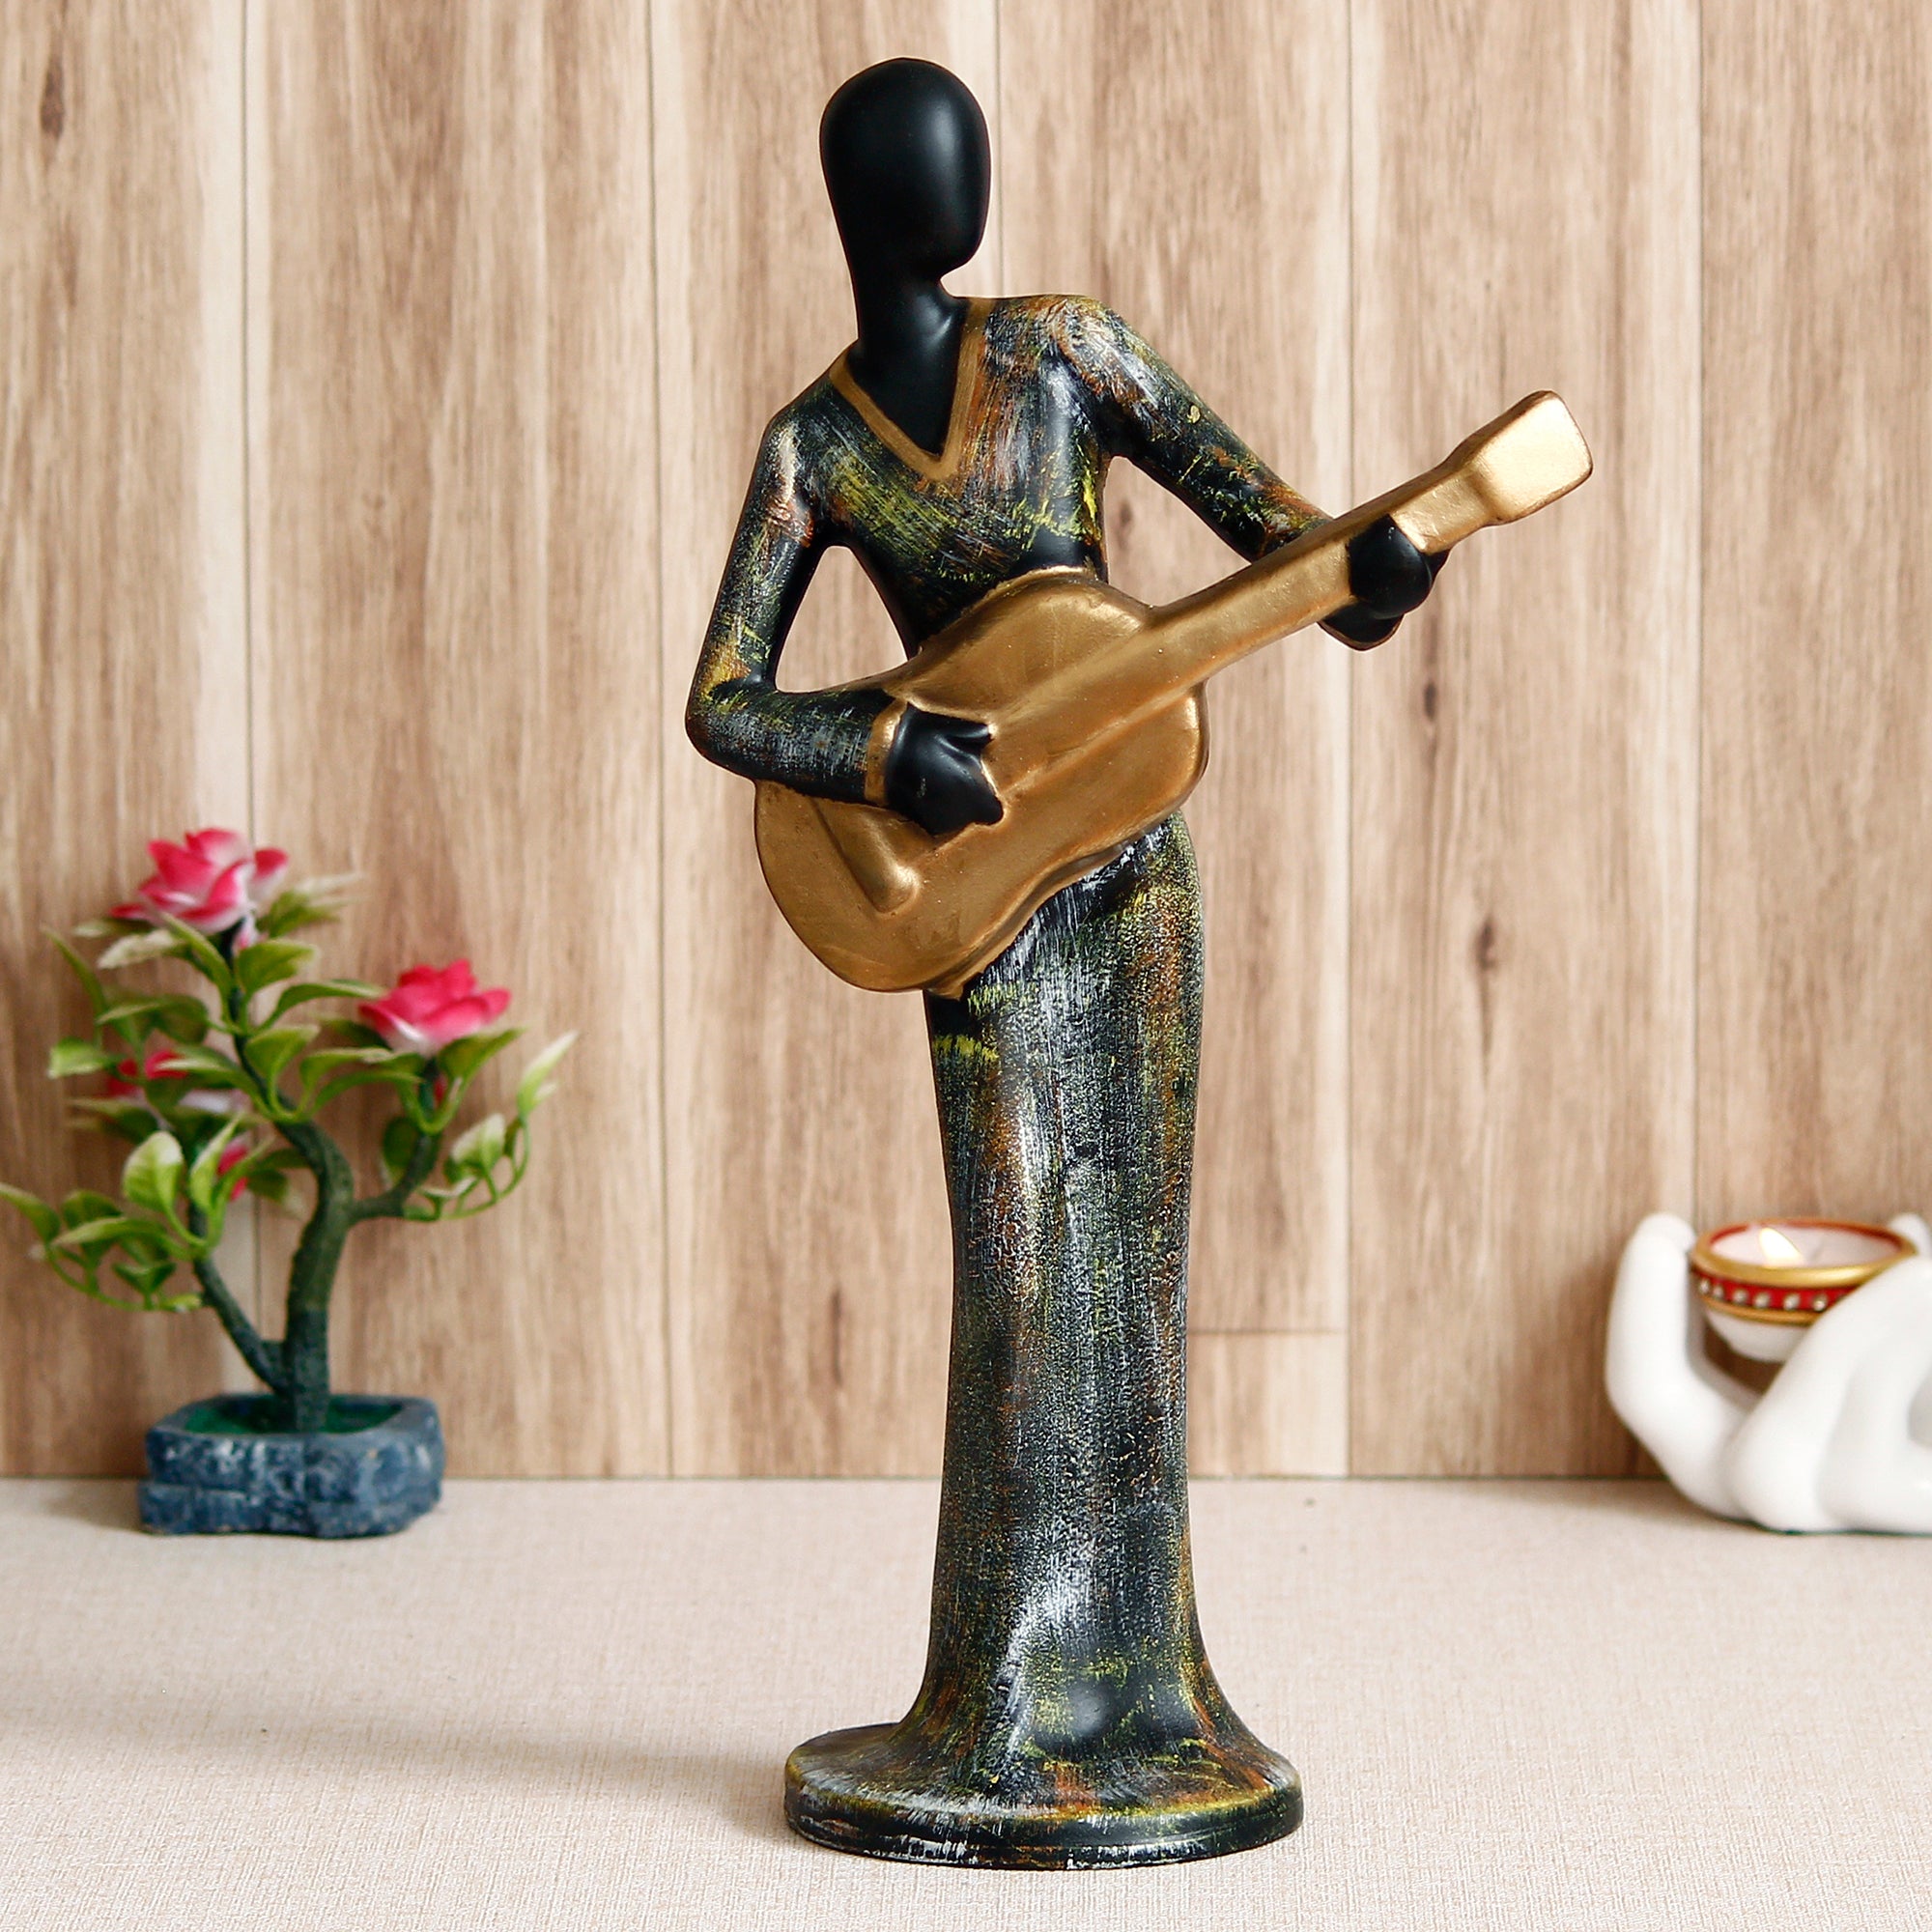 Grey and Black Polyresin Lady figurine Playing Guitar Musical Instrument Handcrafted Decorative Showpiece 1